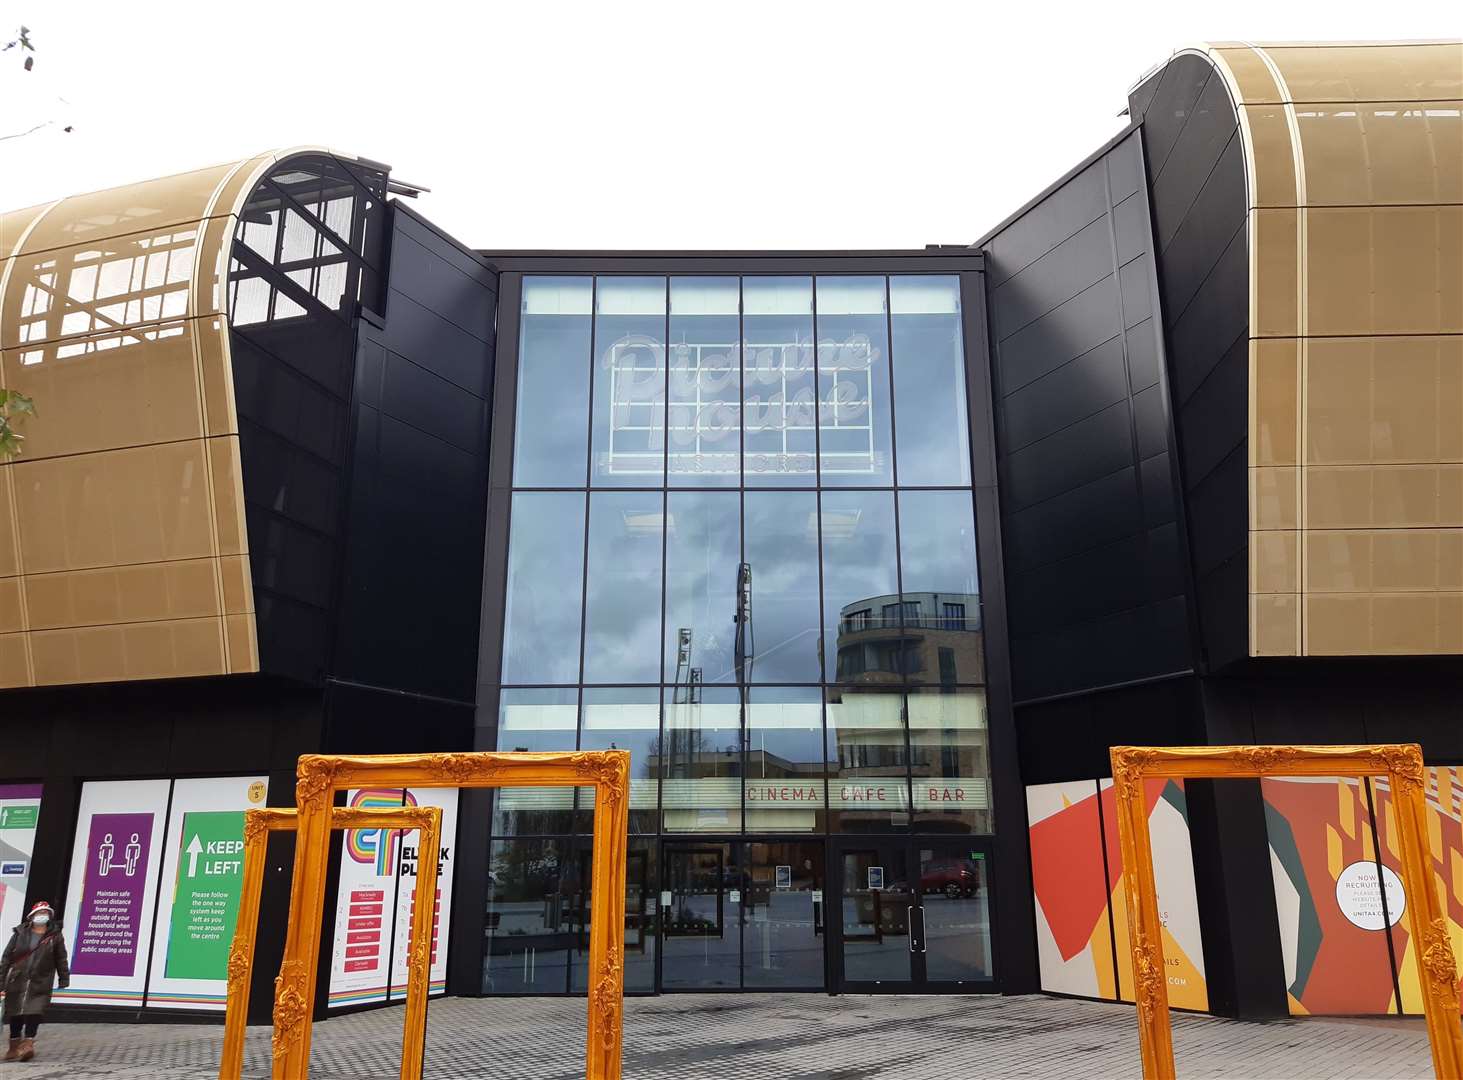 The Picturehouse cinema at Elwick Place opened in December 2018